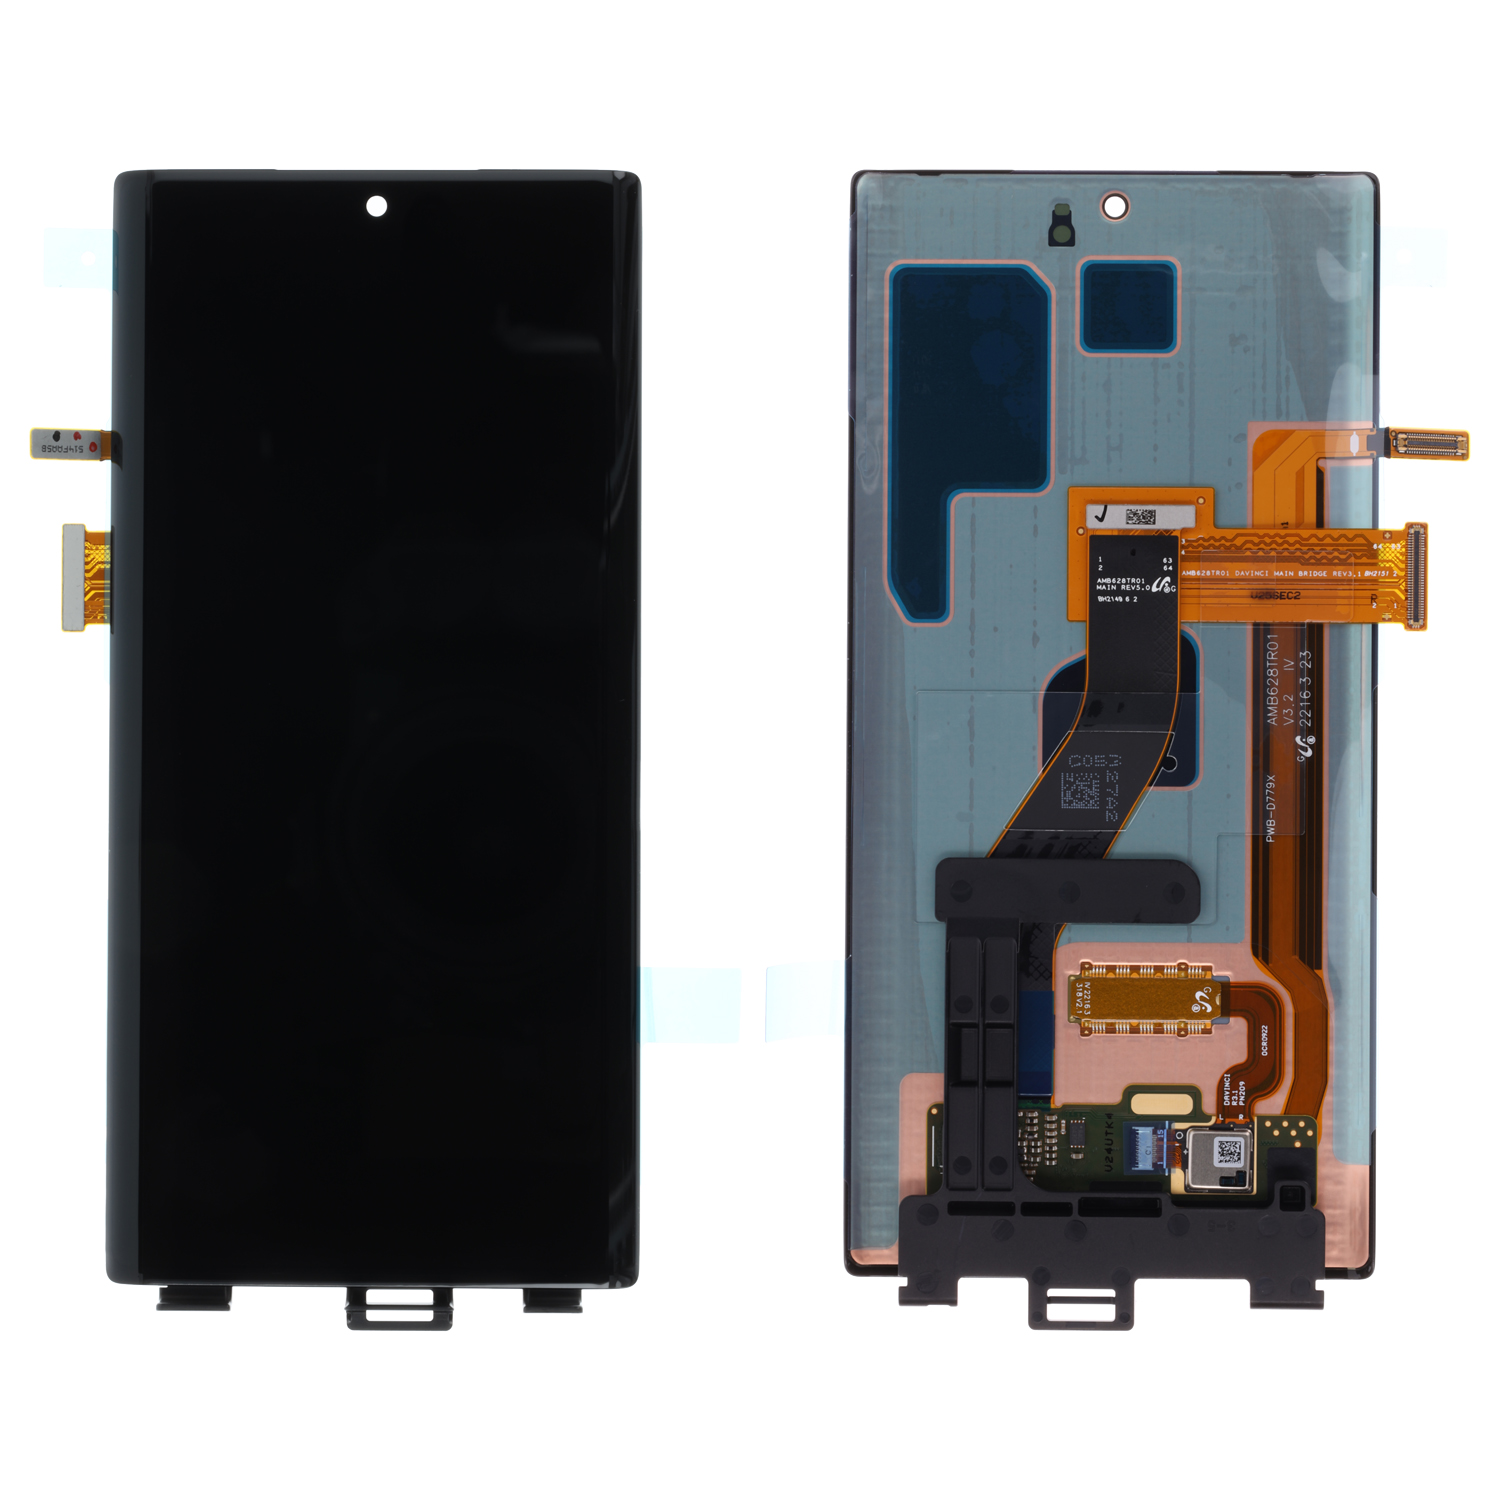 Samsung Galaxy Note 10 N970 LCD Display (without frame)